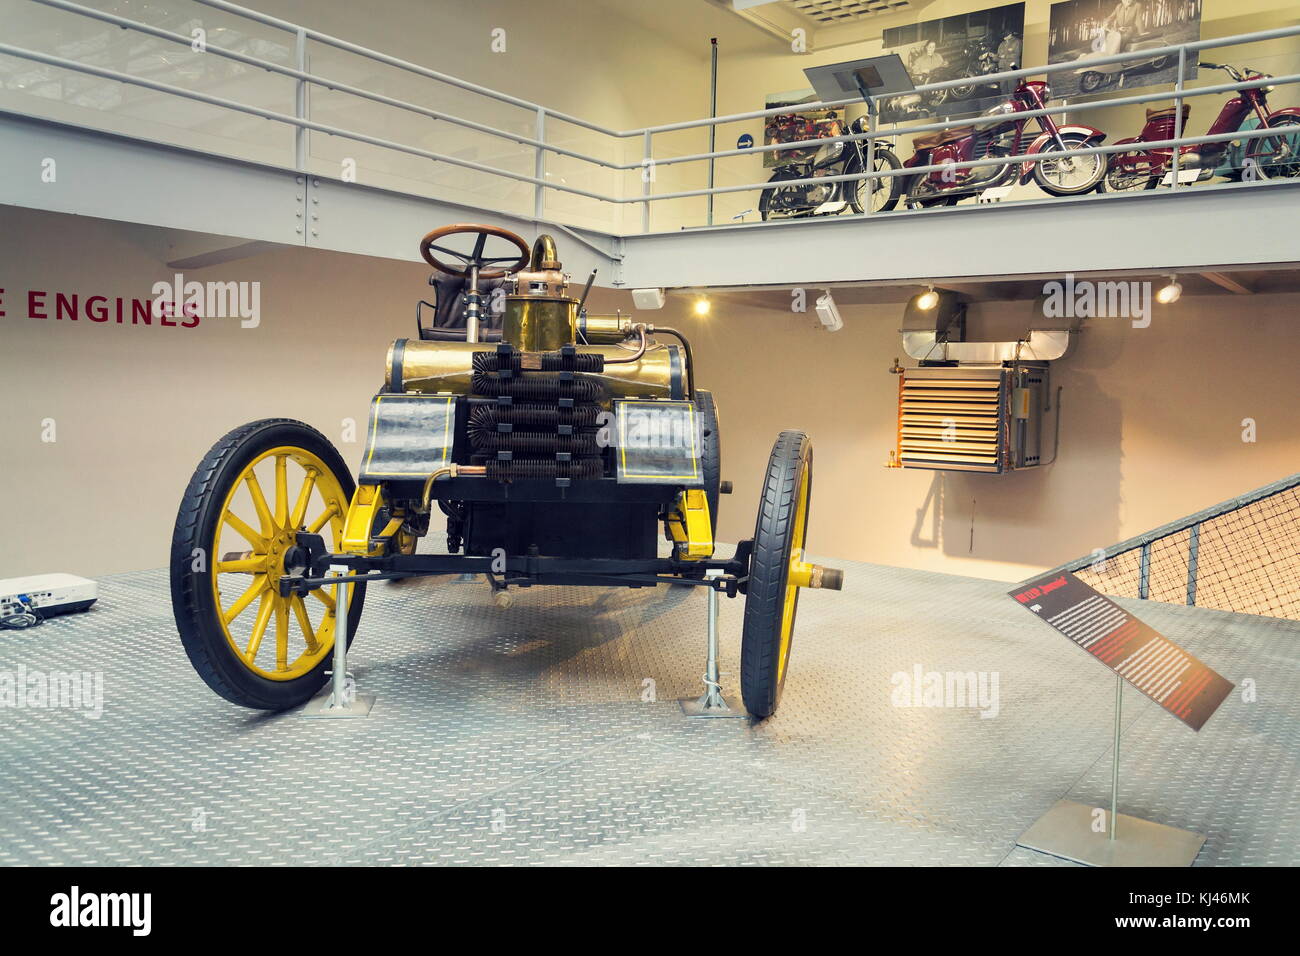 PRAGUE, CZECH REPUBLIC - NOVEMBER 10: The NW 12 HP racing car from 1900 stands in National technical museum on November 10, 2017 in Prague, Czech repu Stock Photo